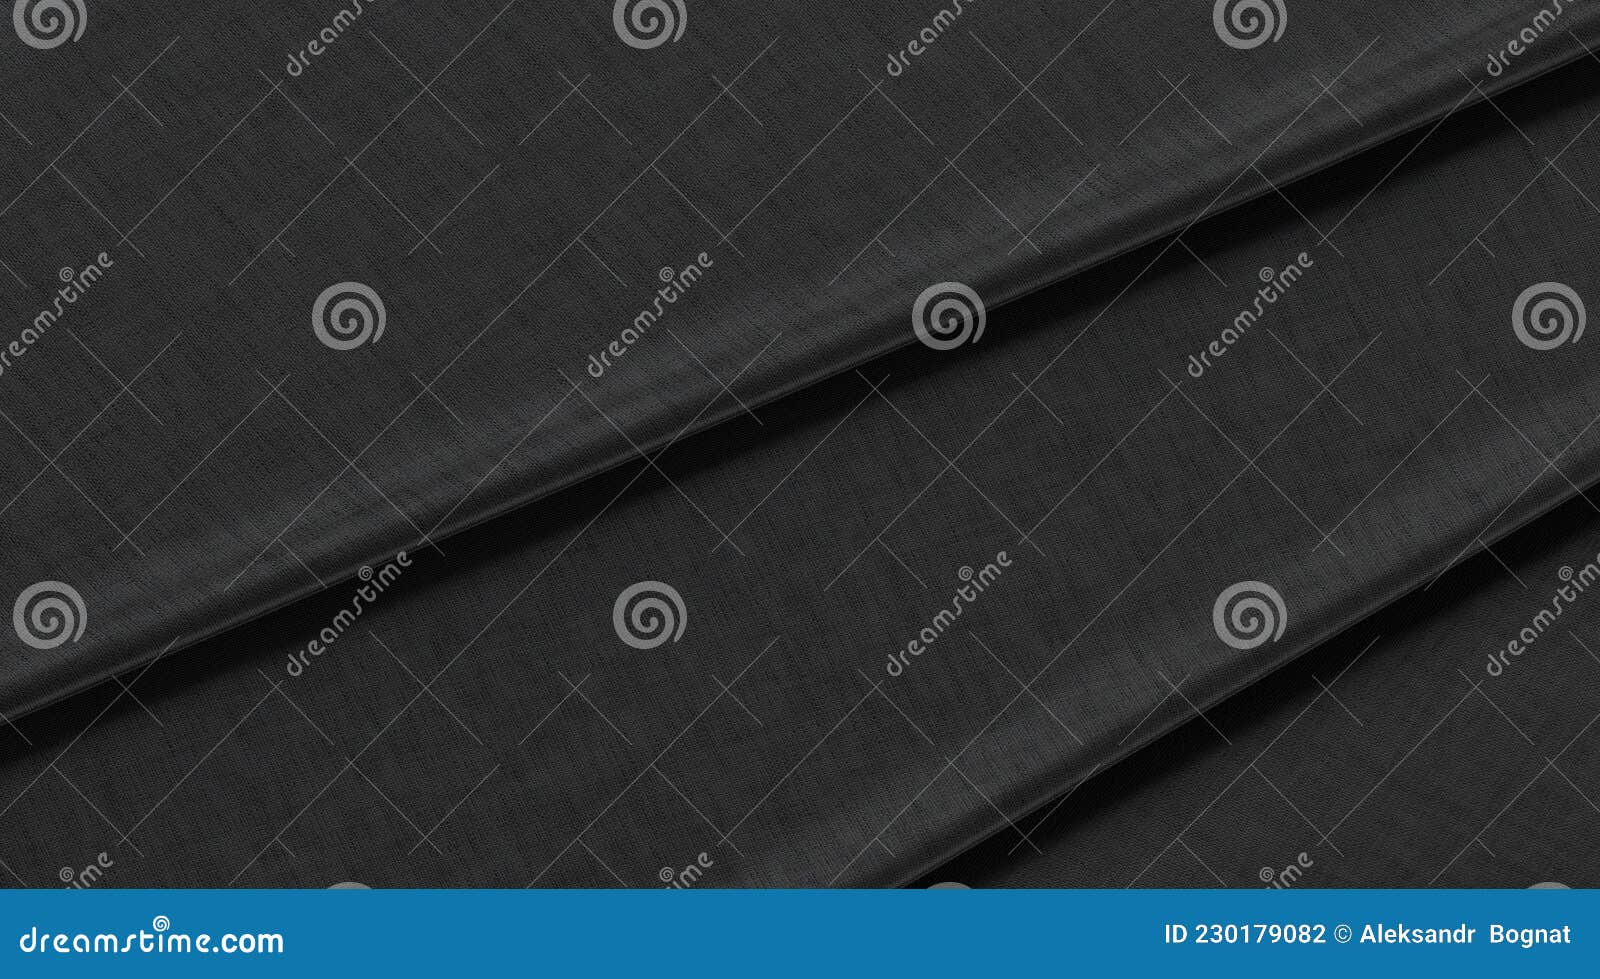 Blank Black Folded Fabric Material Mock Up, Top View Stock Illustration ...